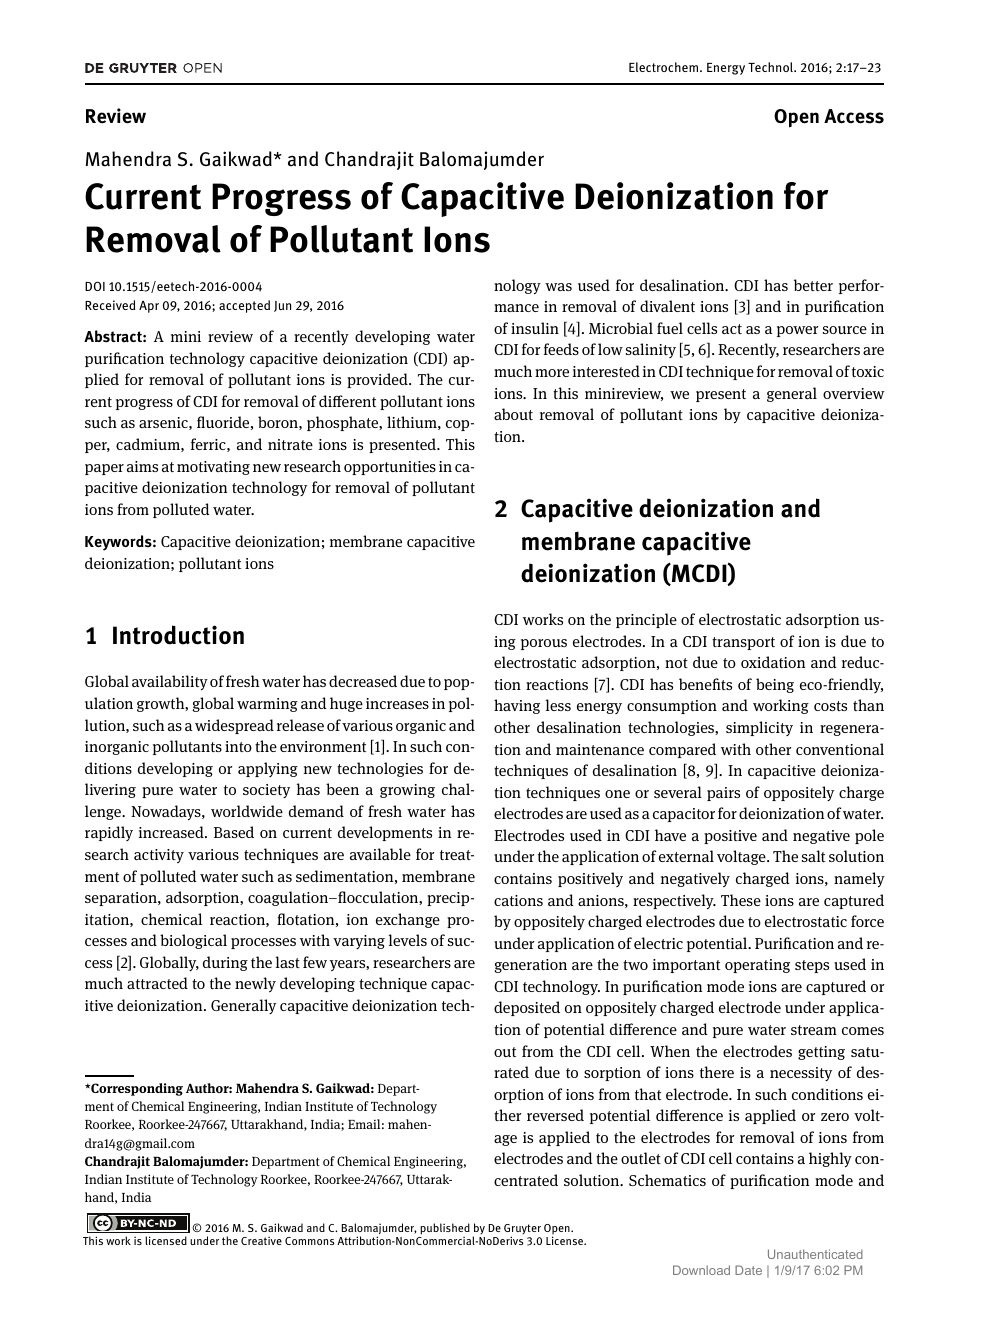 Current Progress Of Capacitive Deionization For Removal Of Pollutant Ions Topic Of Research Paper In Chemical Sciences Download Scholarly Article Pdf And Read For Free On Cyberleninka Open Science Hub